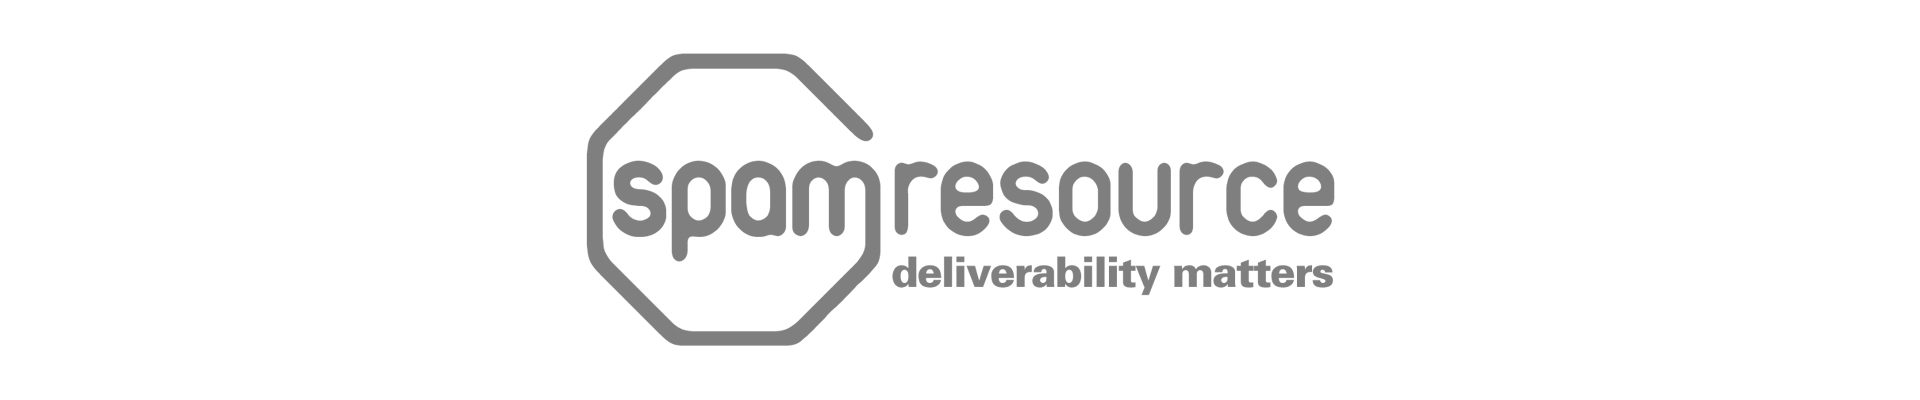 Spam Resource: Deliverability Matters